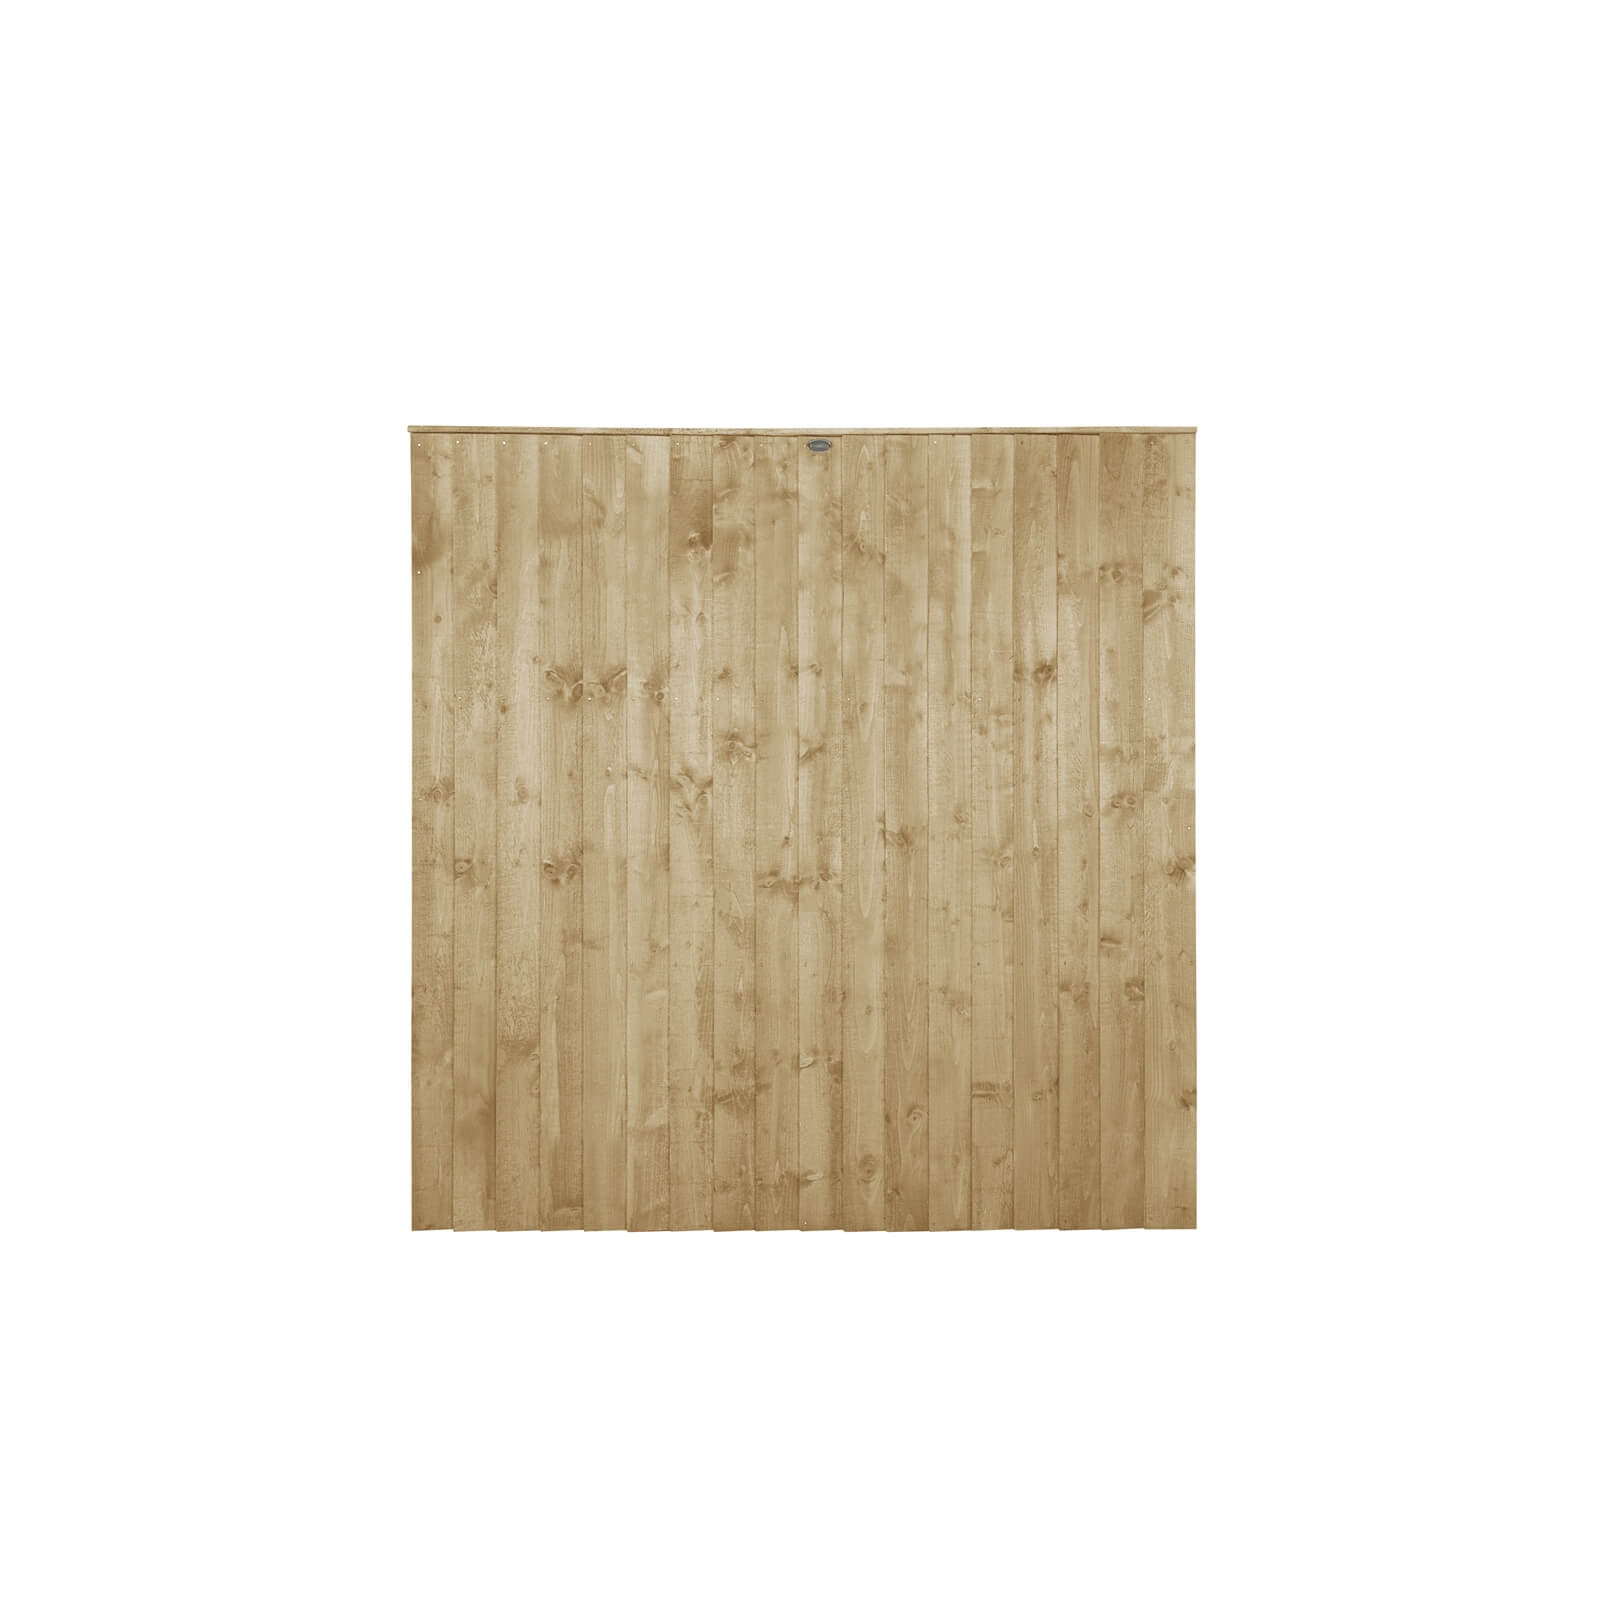 6ft x 6ft (1.83m x 1.85m) Pressure Treated Featheredge Fence Panel - Pack of 3